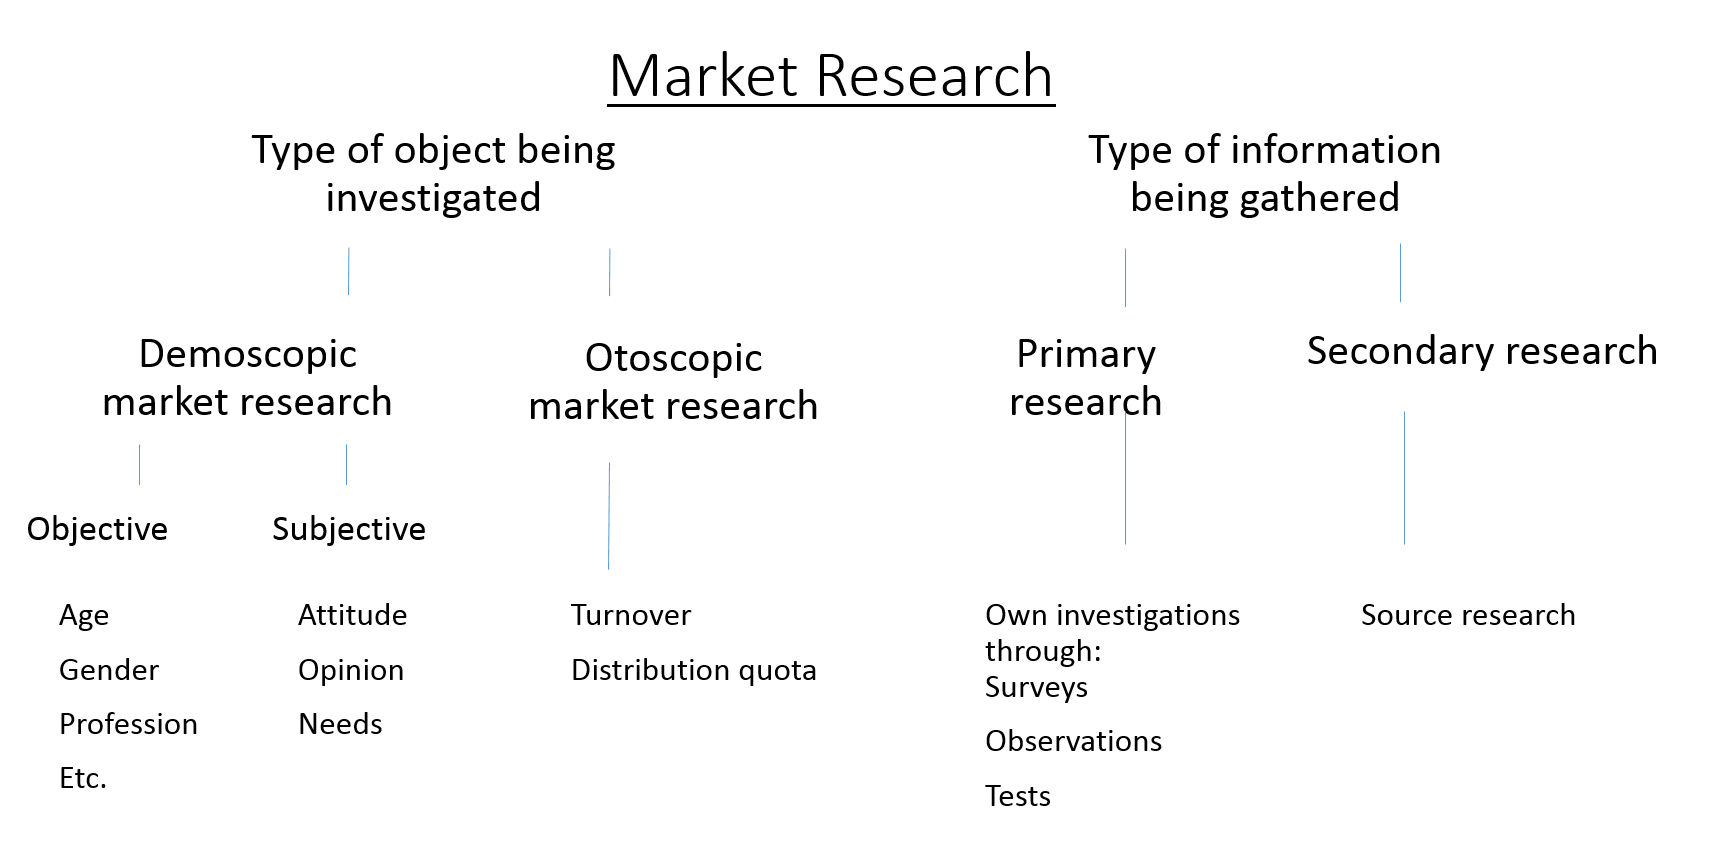 Schematic representation of the types of market research